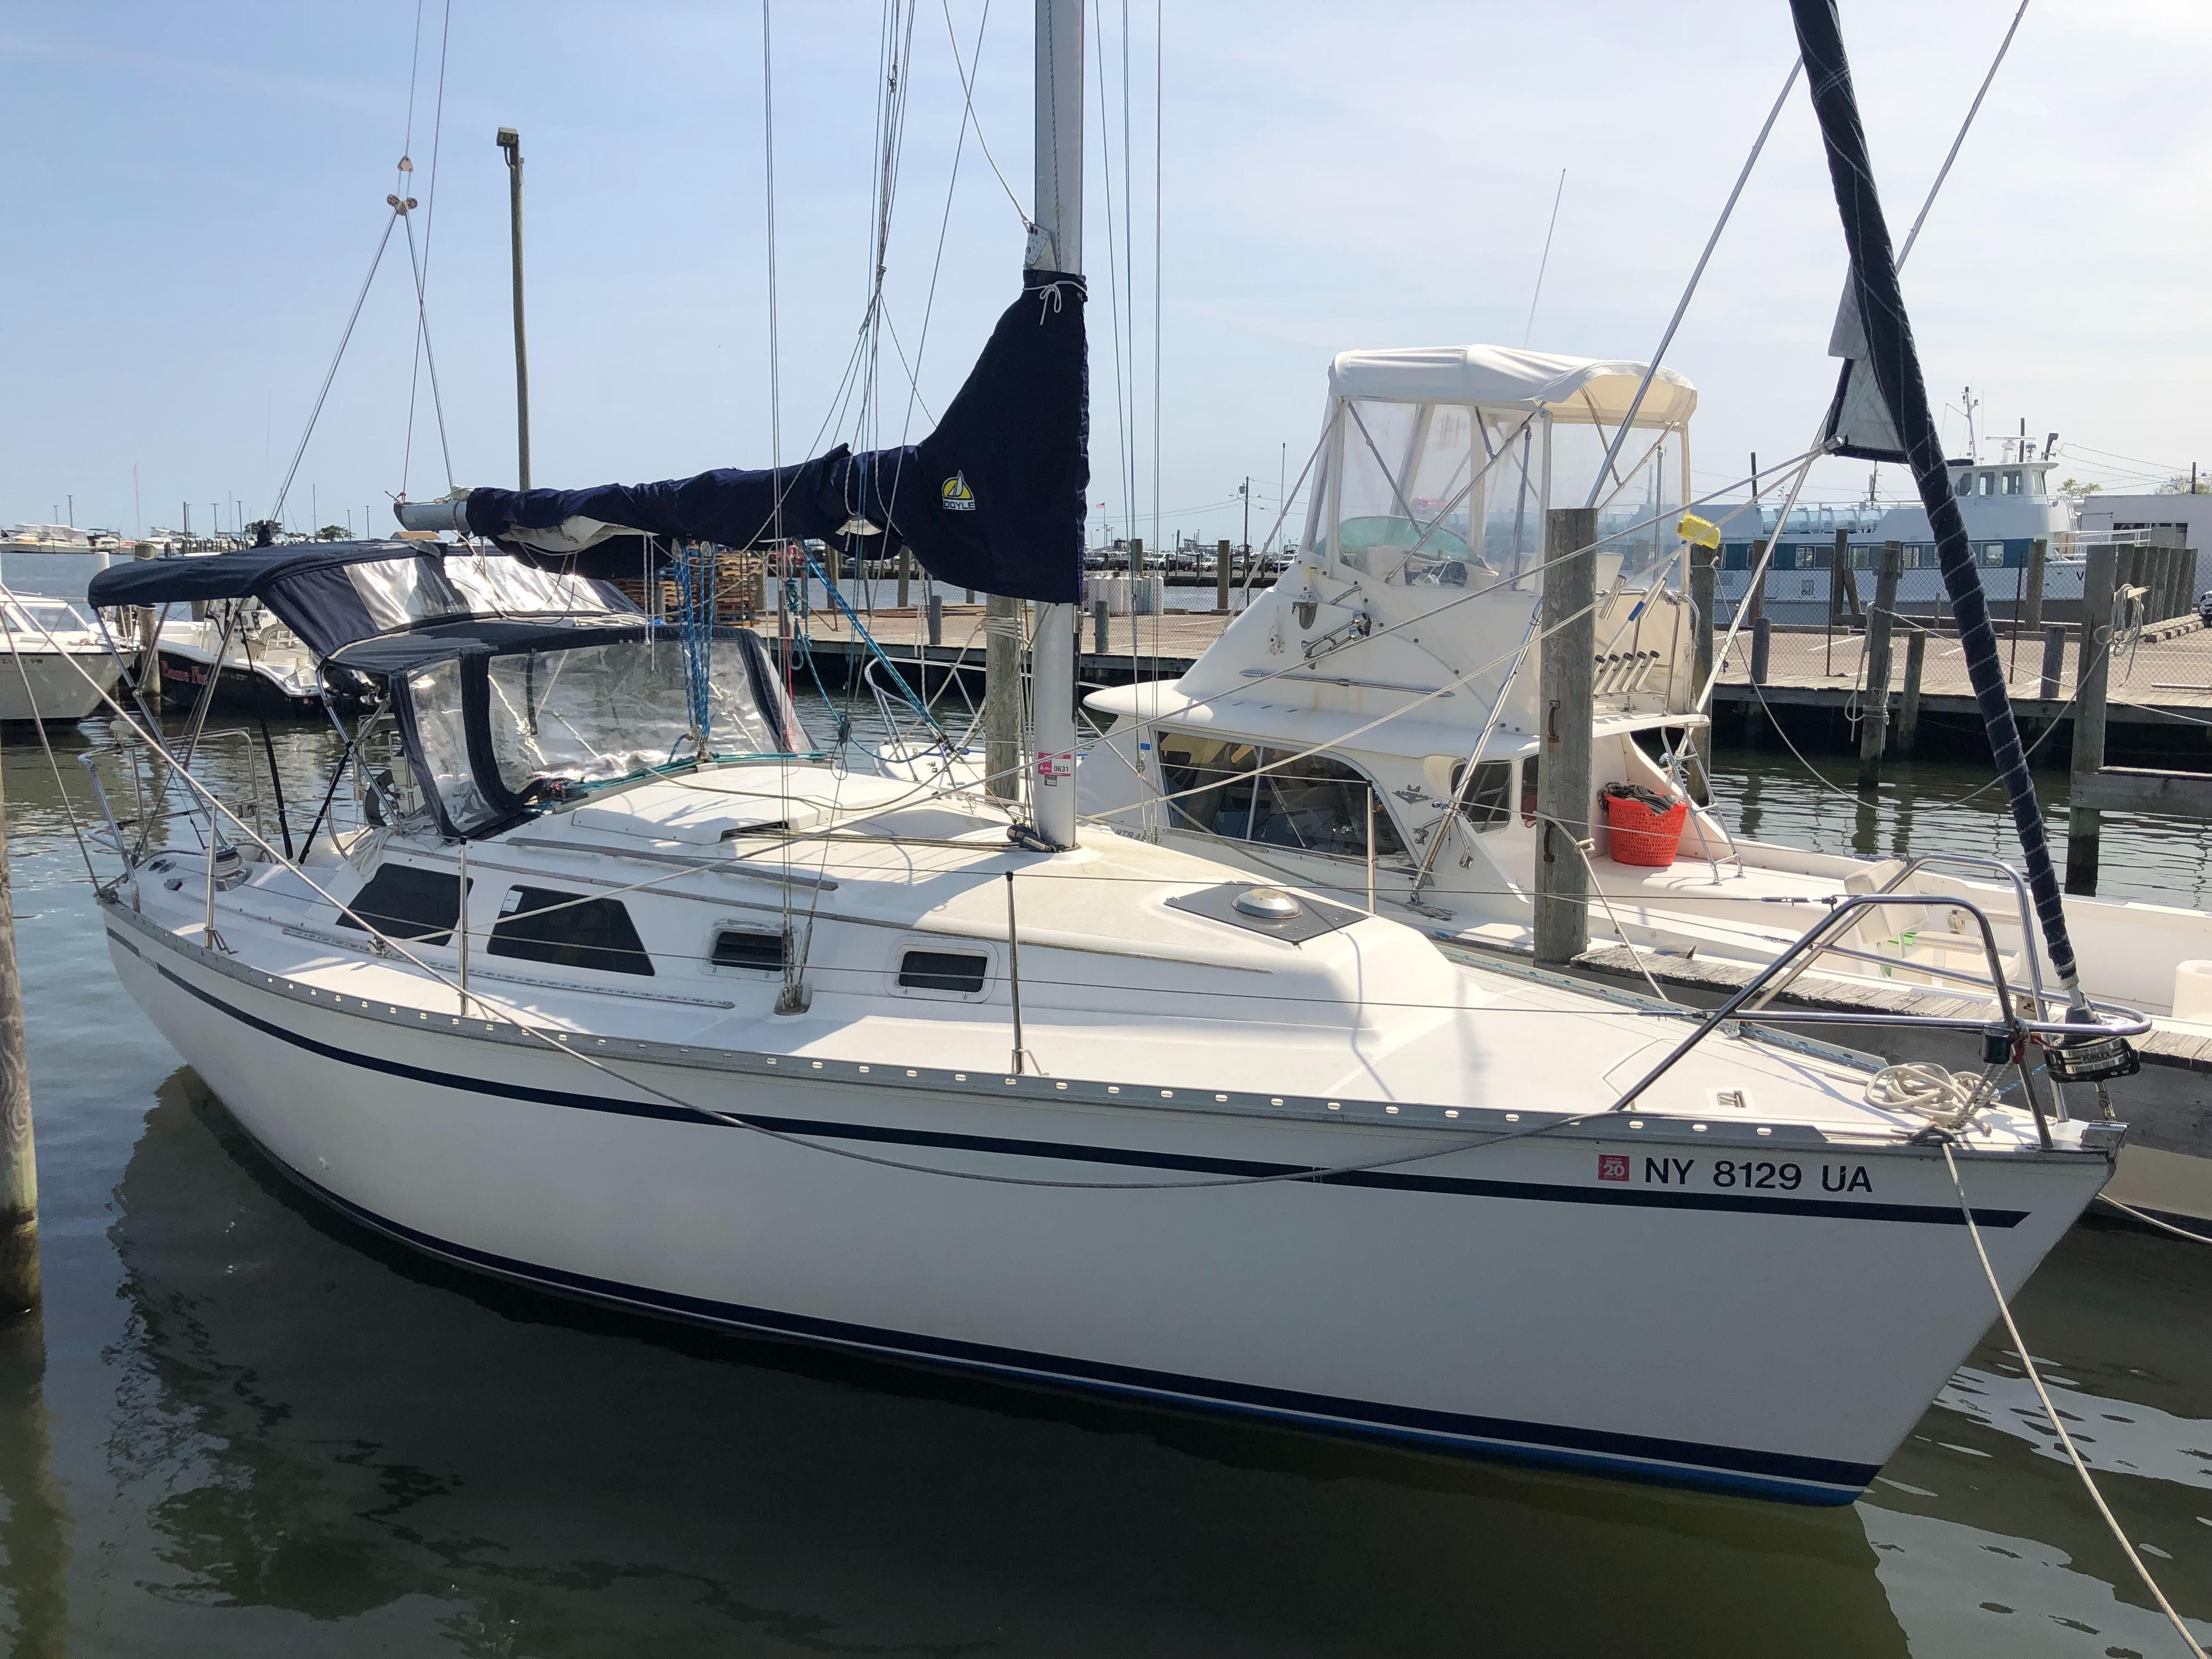 28' sailboat for sale